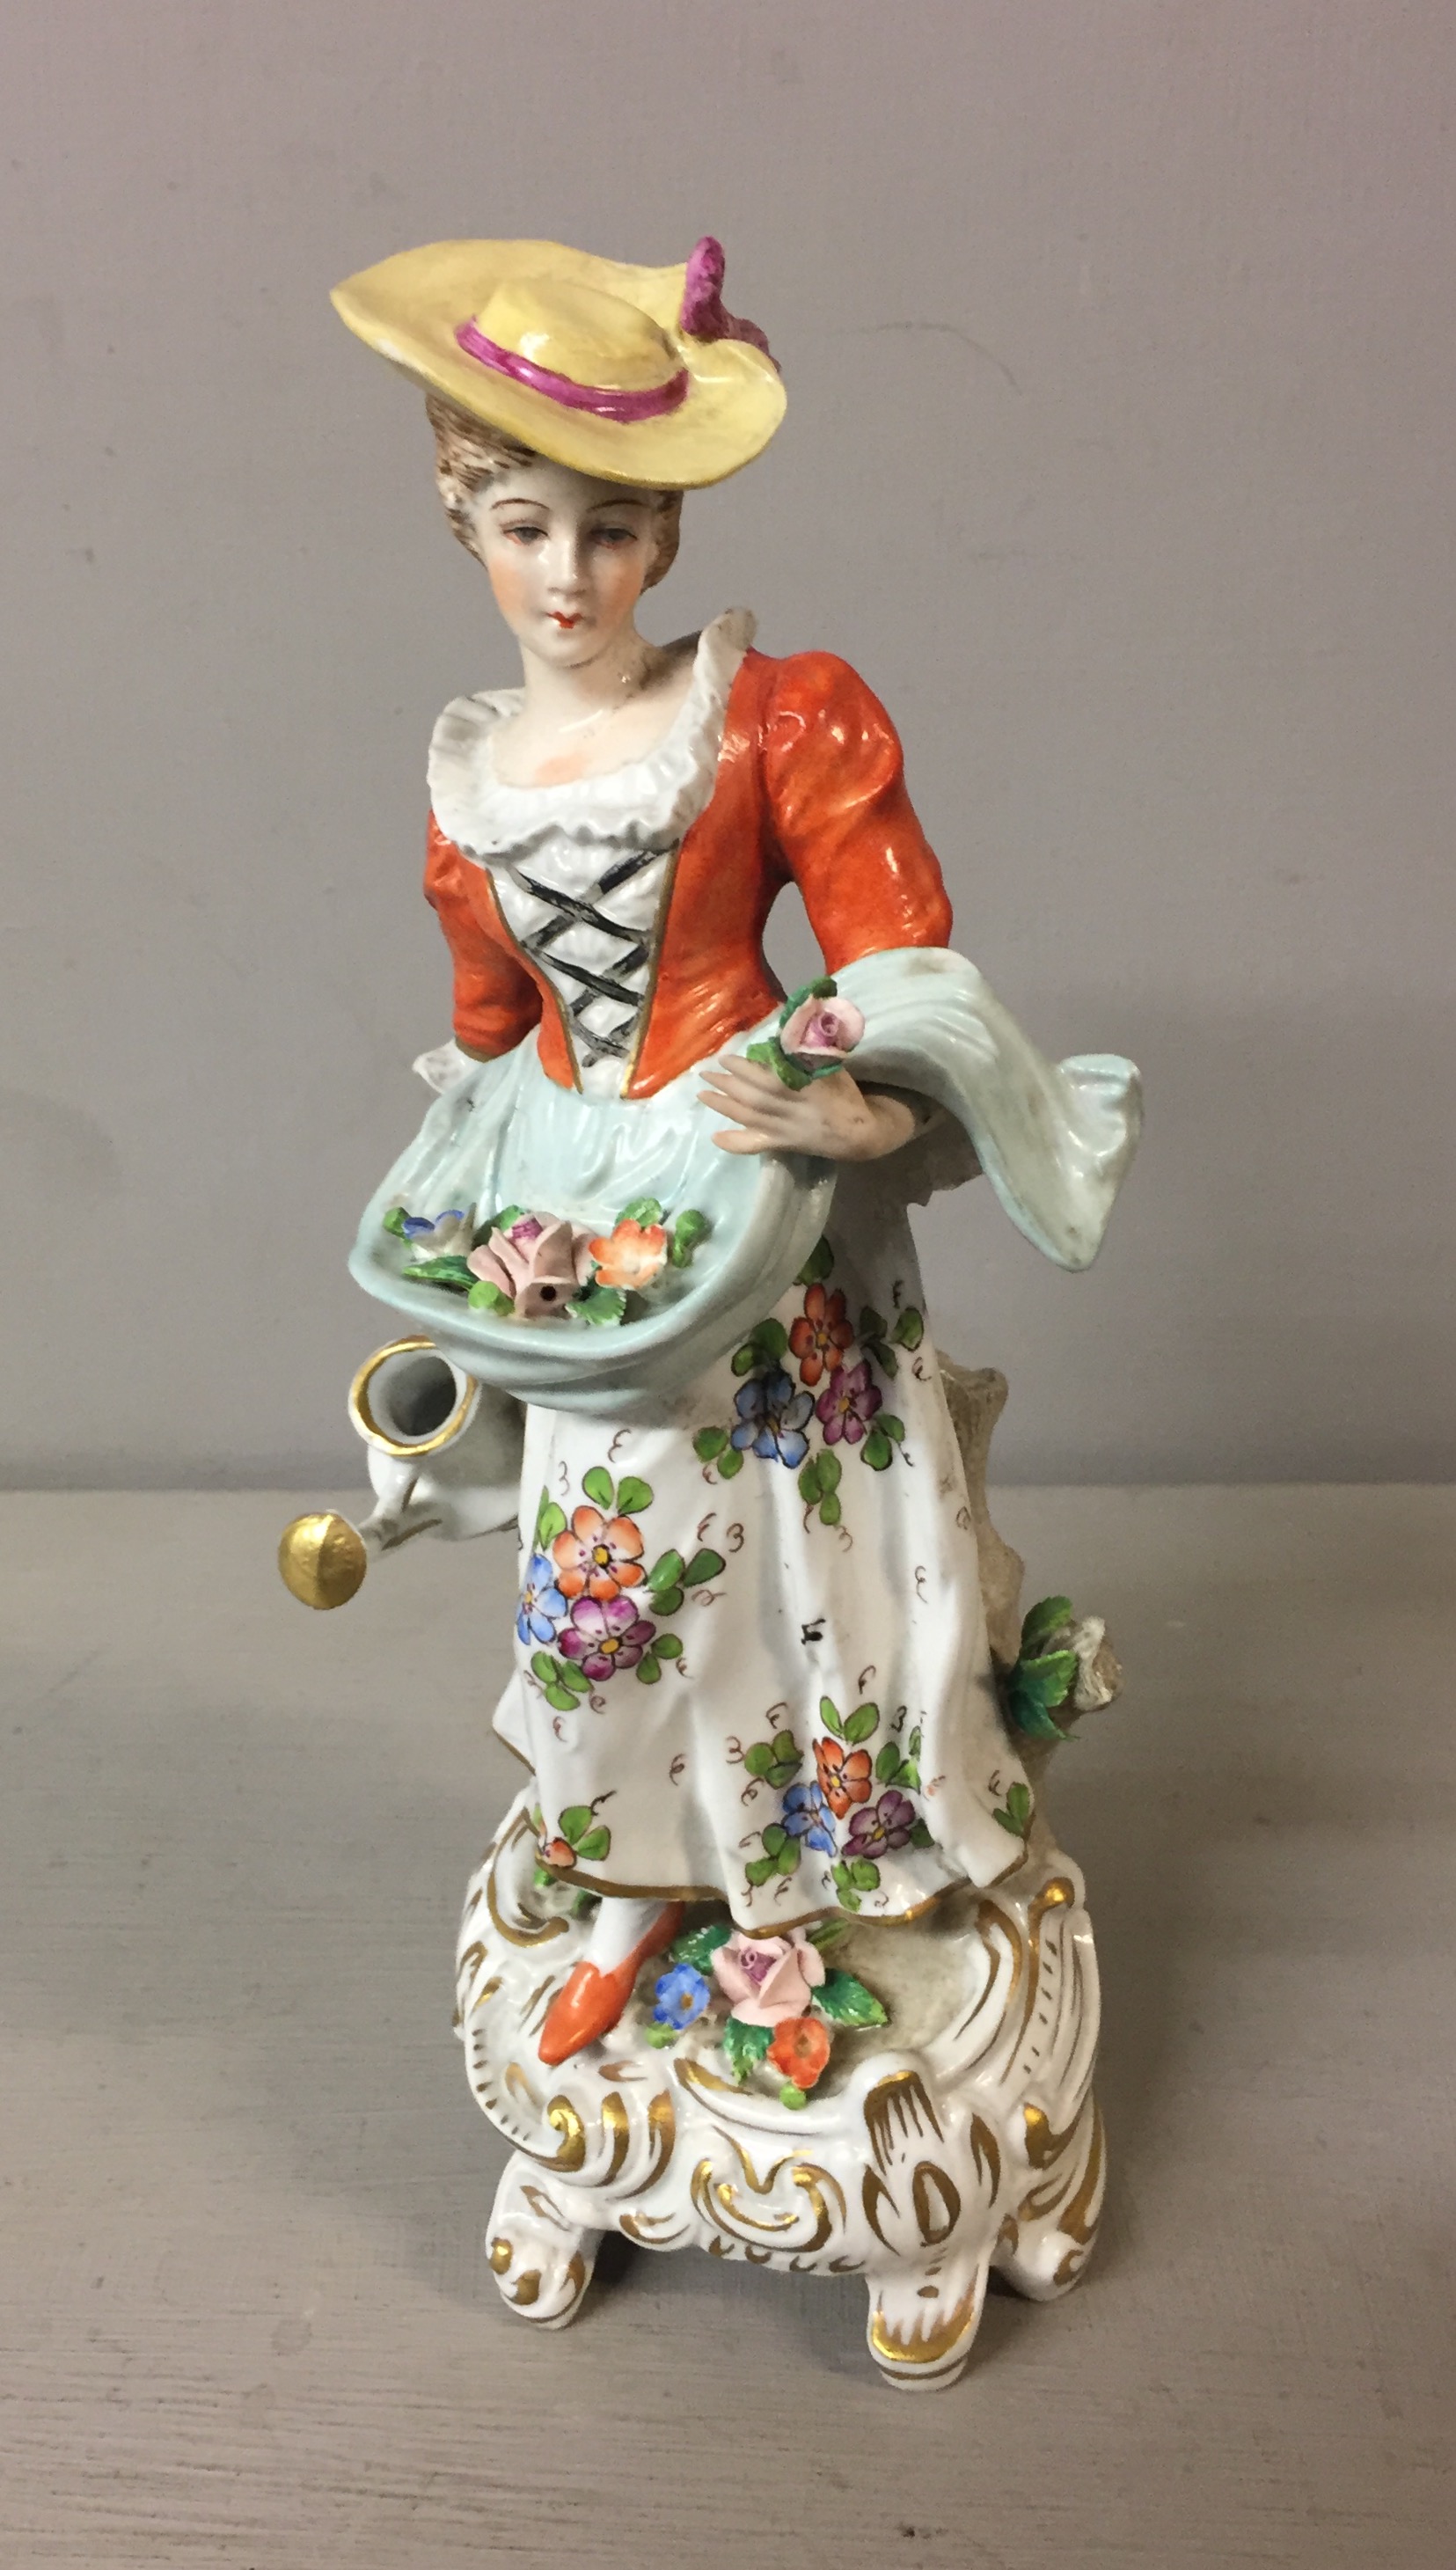 SITZENDORF, A 20TH CENTURY PORCELAIN FIGURE OF A LADY GARDENER Holding a watering can. (h 23cm)